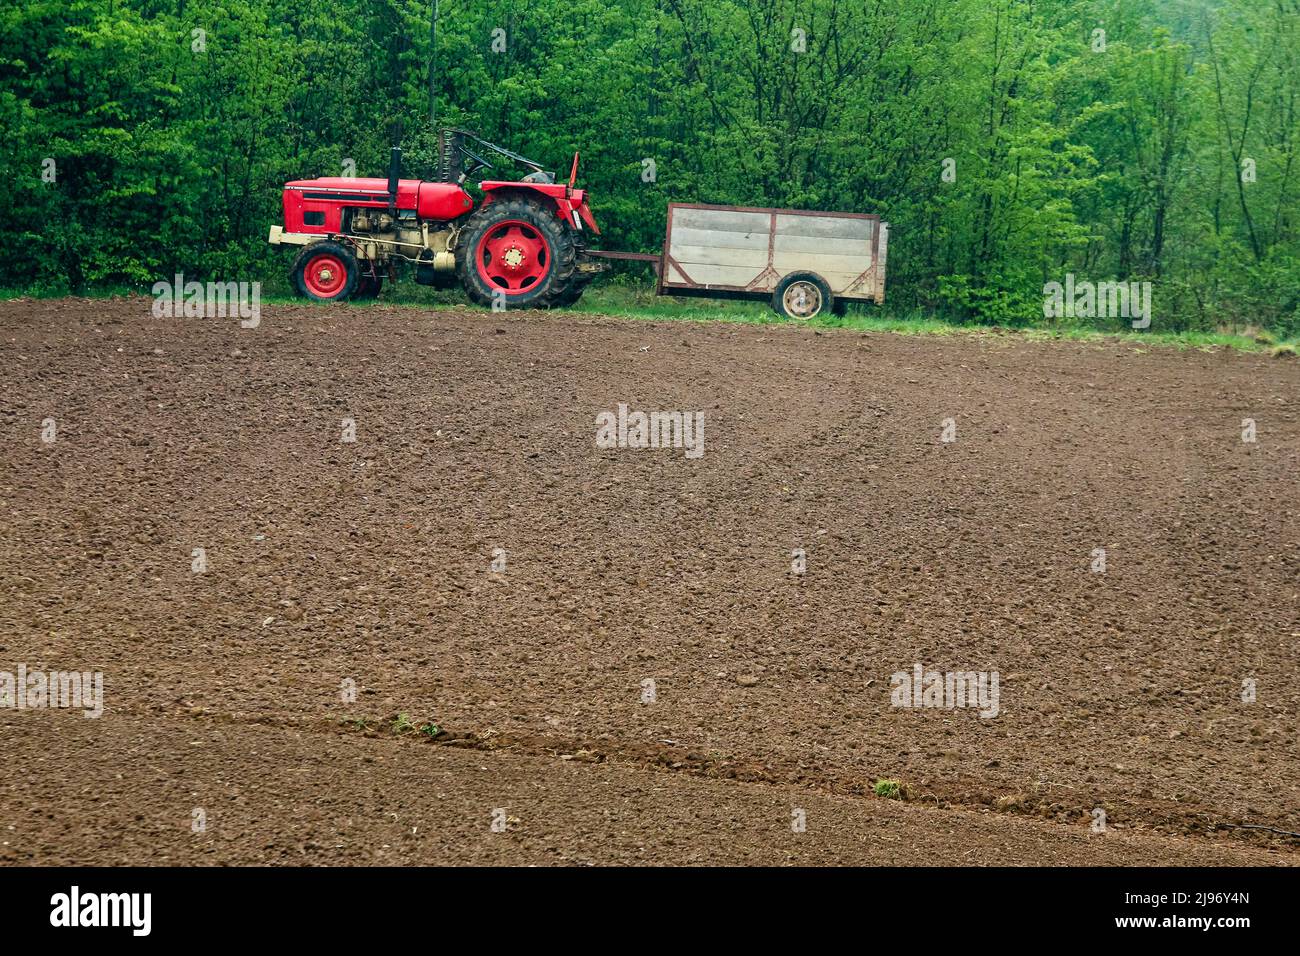 The old, veteran but reliable tractor standing on the field. Symbol for rural agriculture and machinery used there. Stock Photo